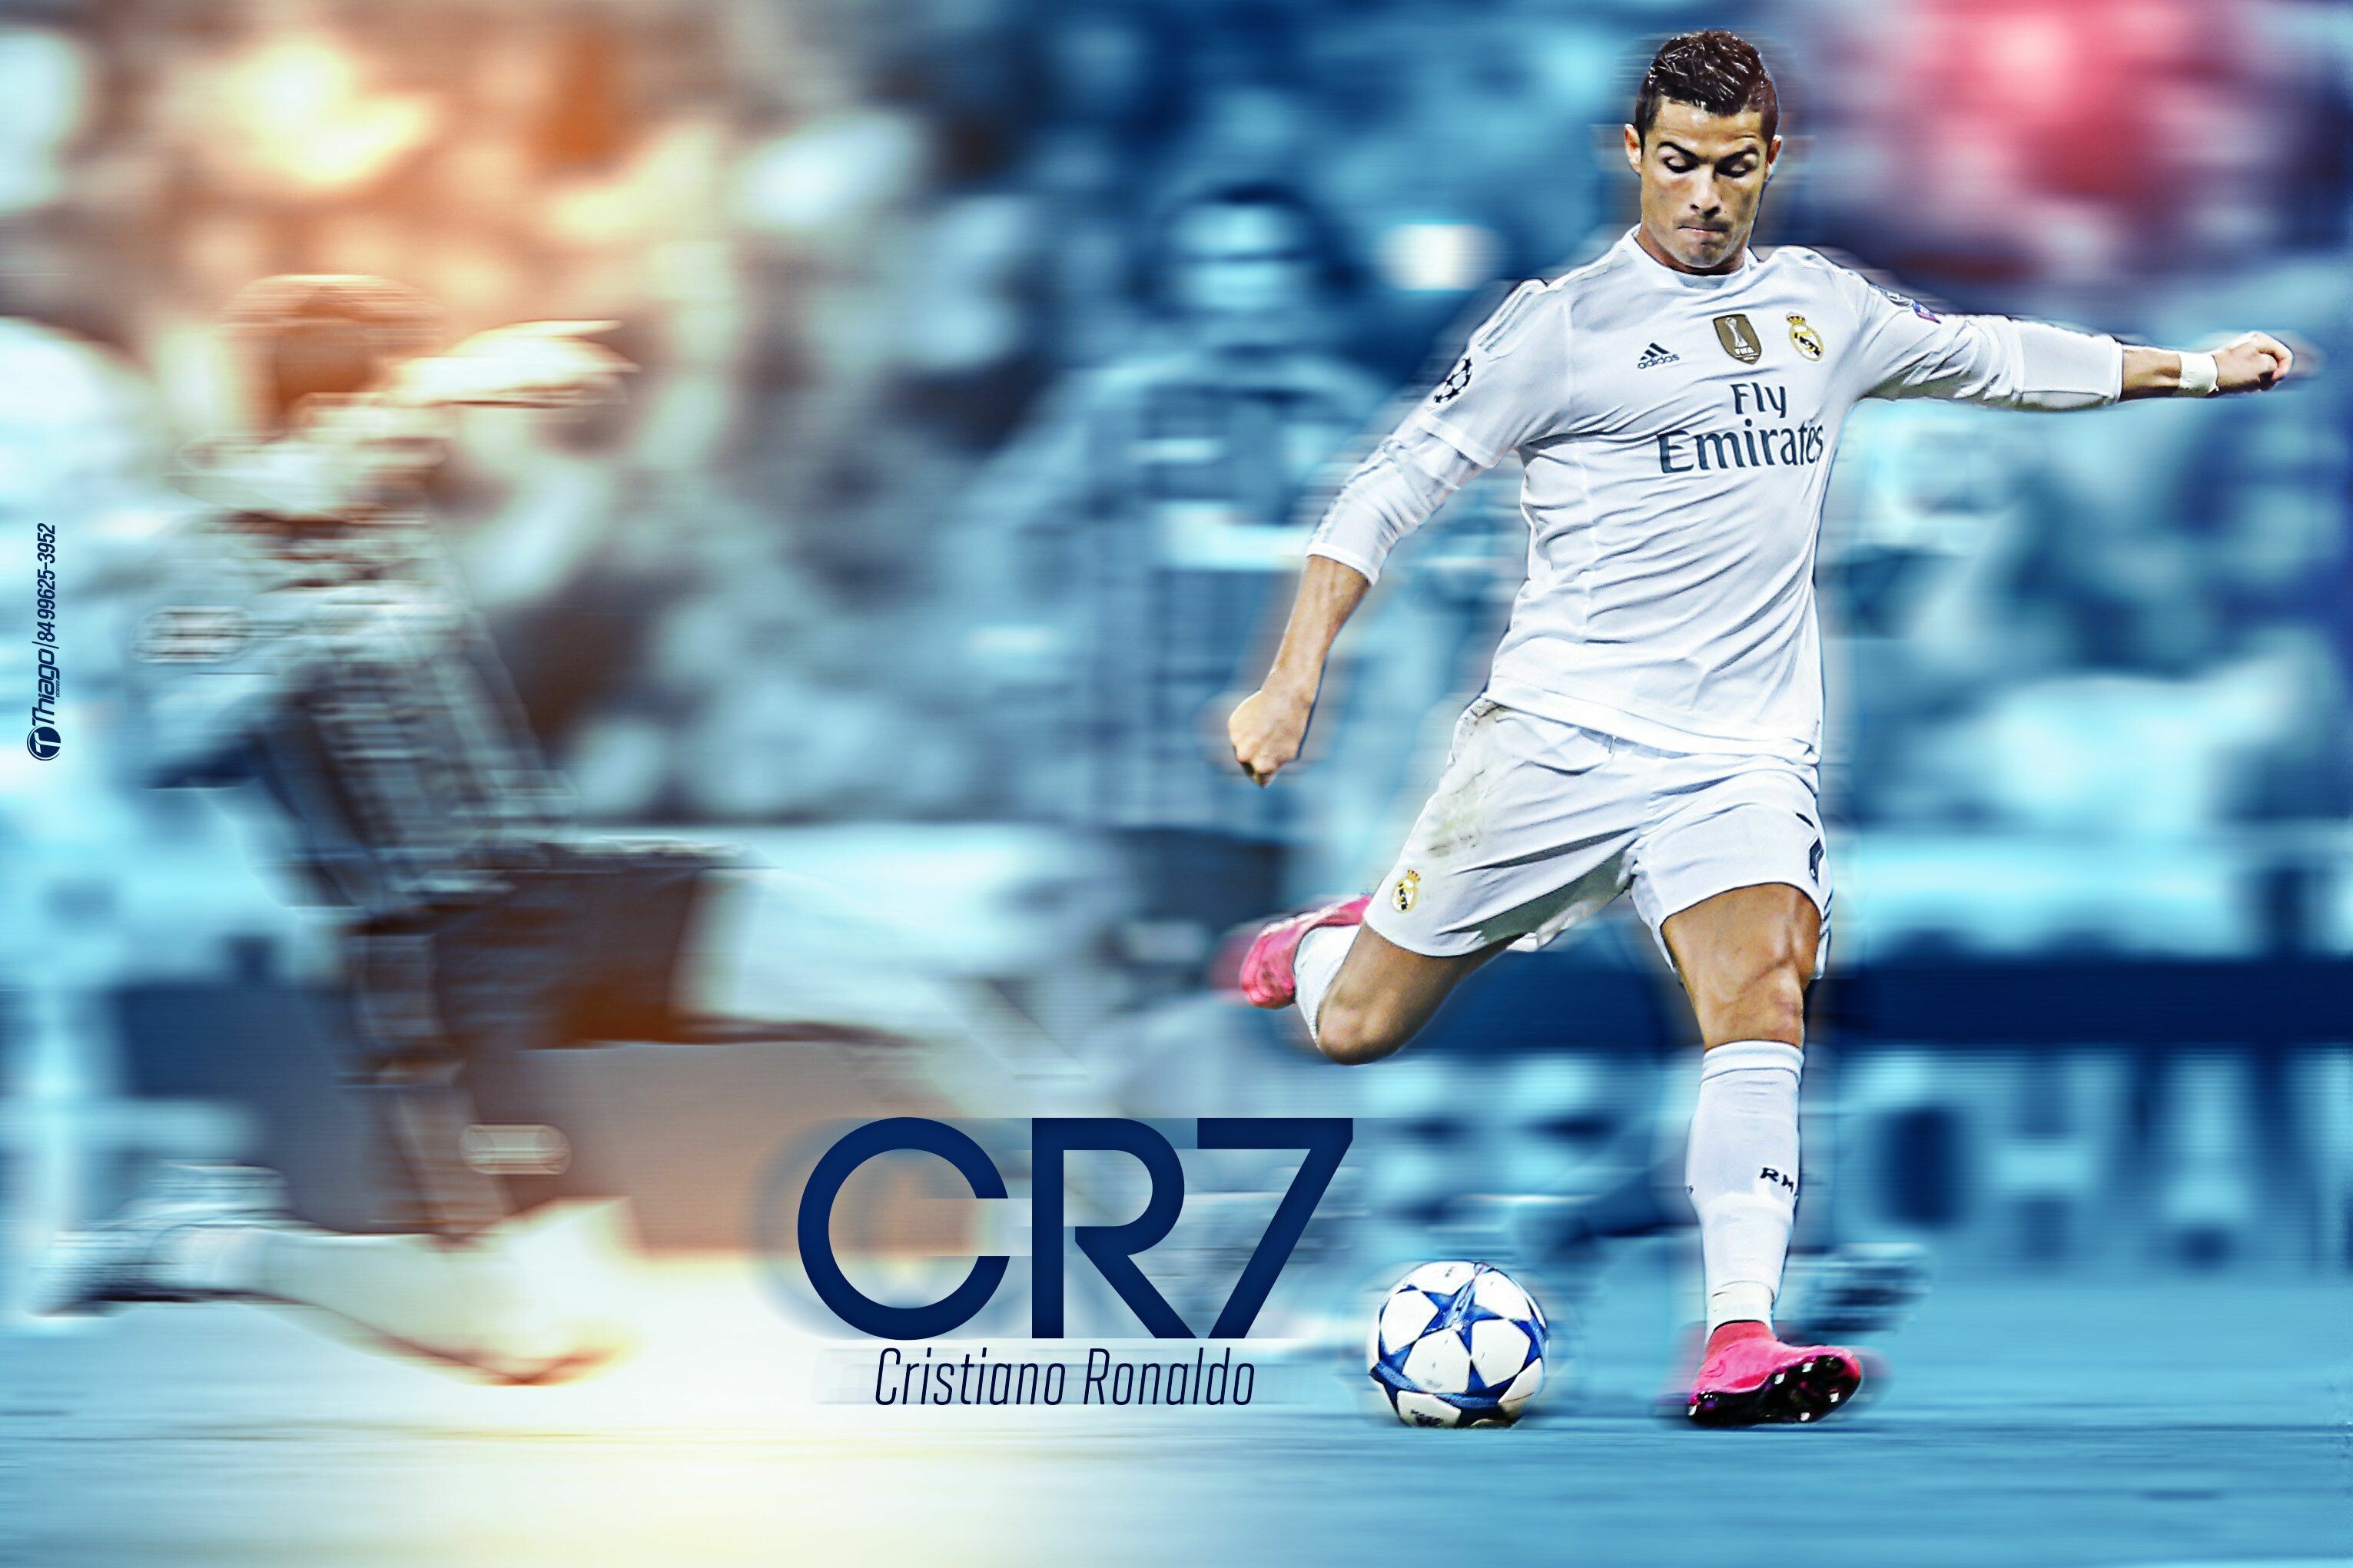 49+ Cristiano Ronaldo Cool Wallpapers: HD, 4K, 5K for PC and Mobile | Download  free images for iPhone, Android